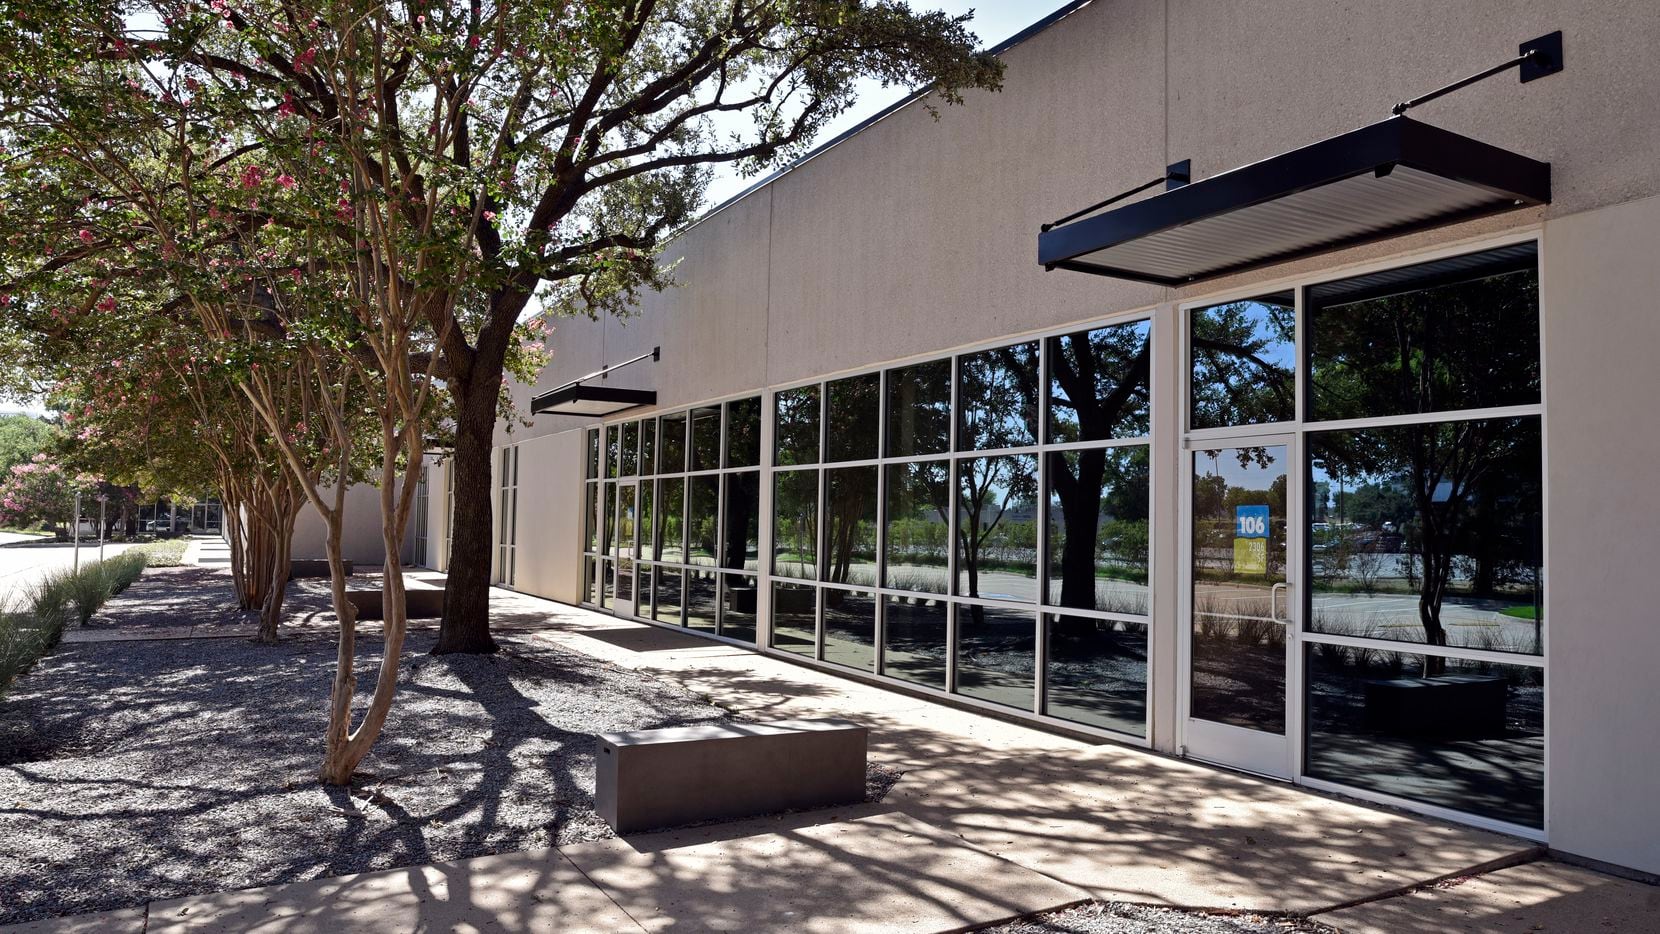 The 40-year-old office center near Mockingbird Lane has been redeveloped into loft-style commercial and residential spaces.